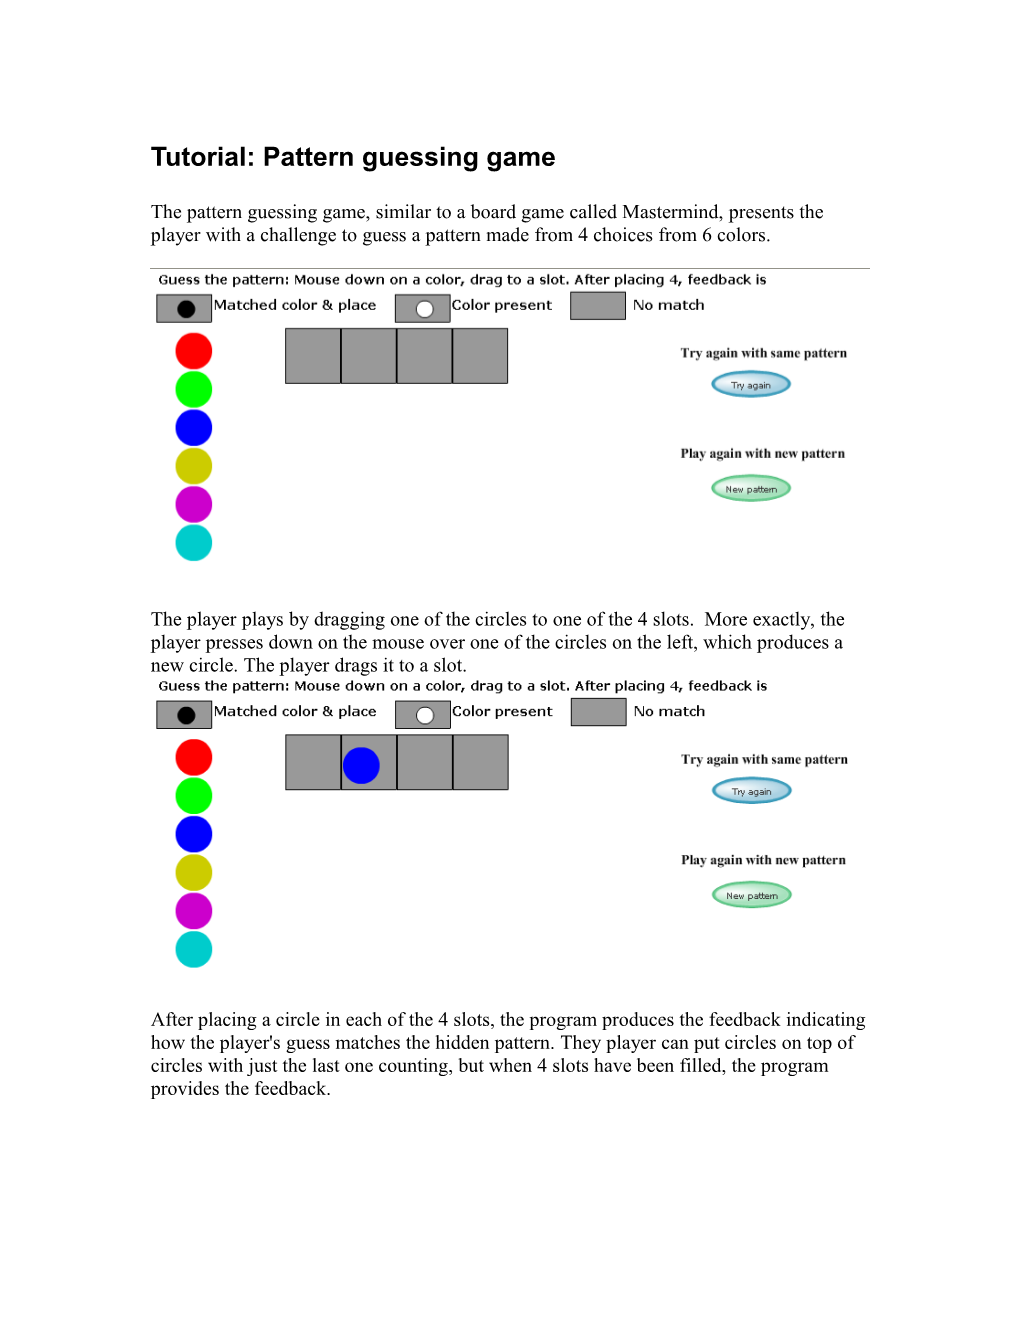 Tutorial: Pattern Guessing Game